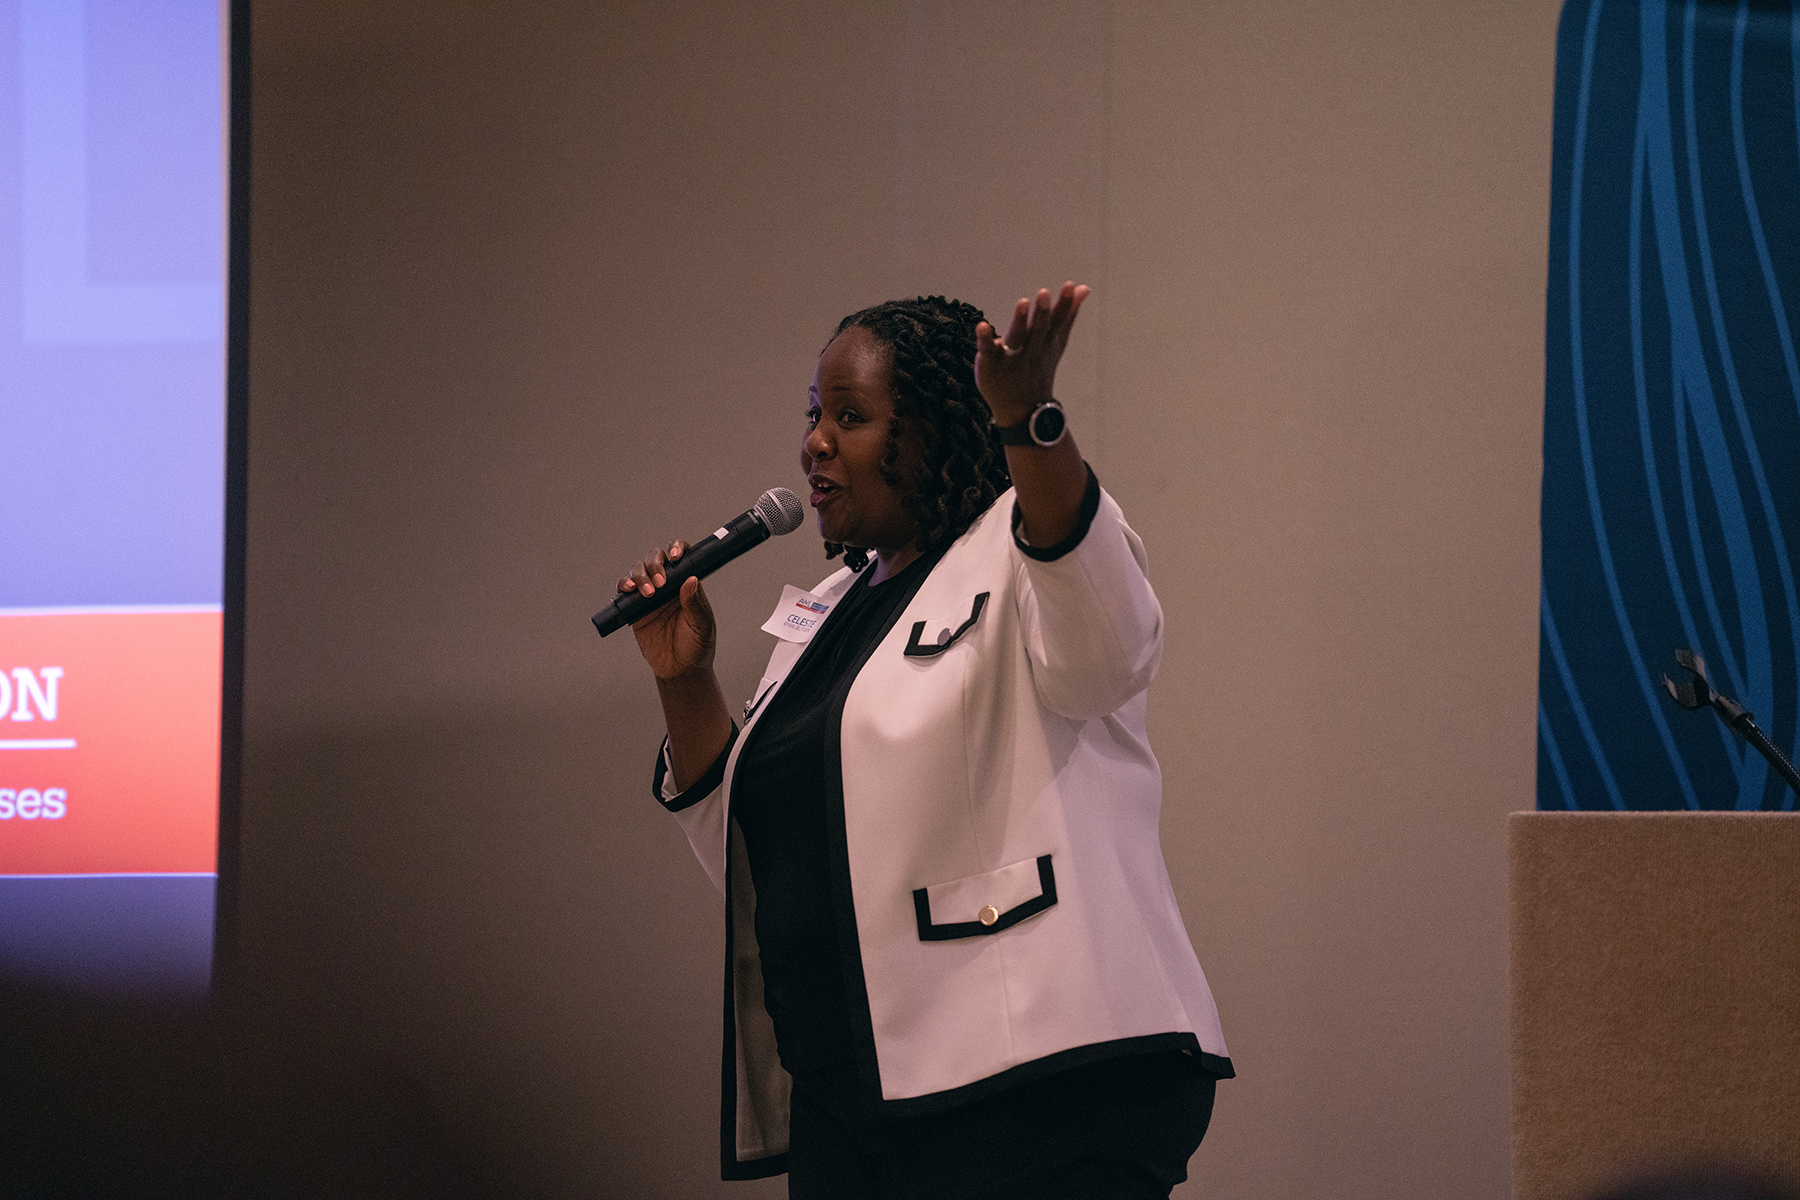 Celeste Ryan Blyden, an Adventist Women Leaders (AWL) founder, speaking during the AWL luncheon held January 11, 2023, at the conclusion of the North American Division's 2023 “Replenish” Adventist Ministries Convention